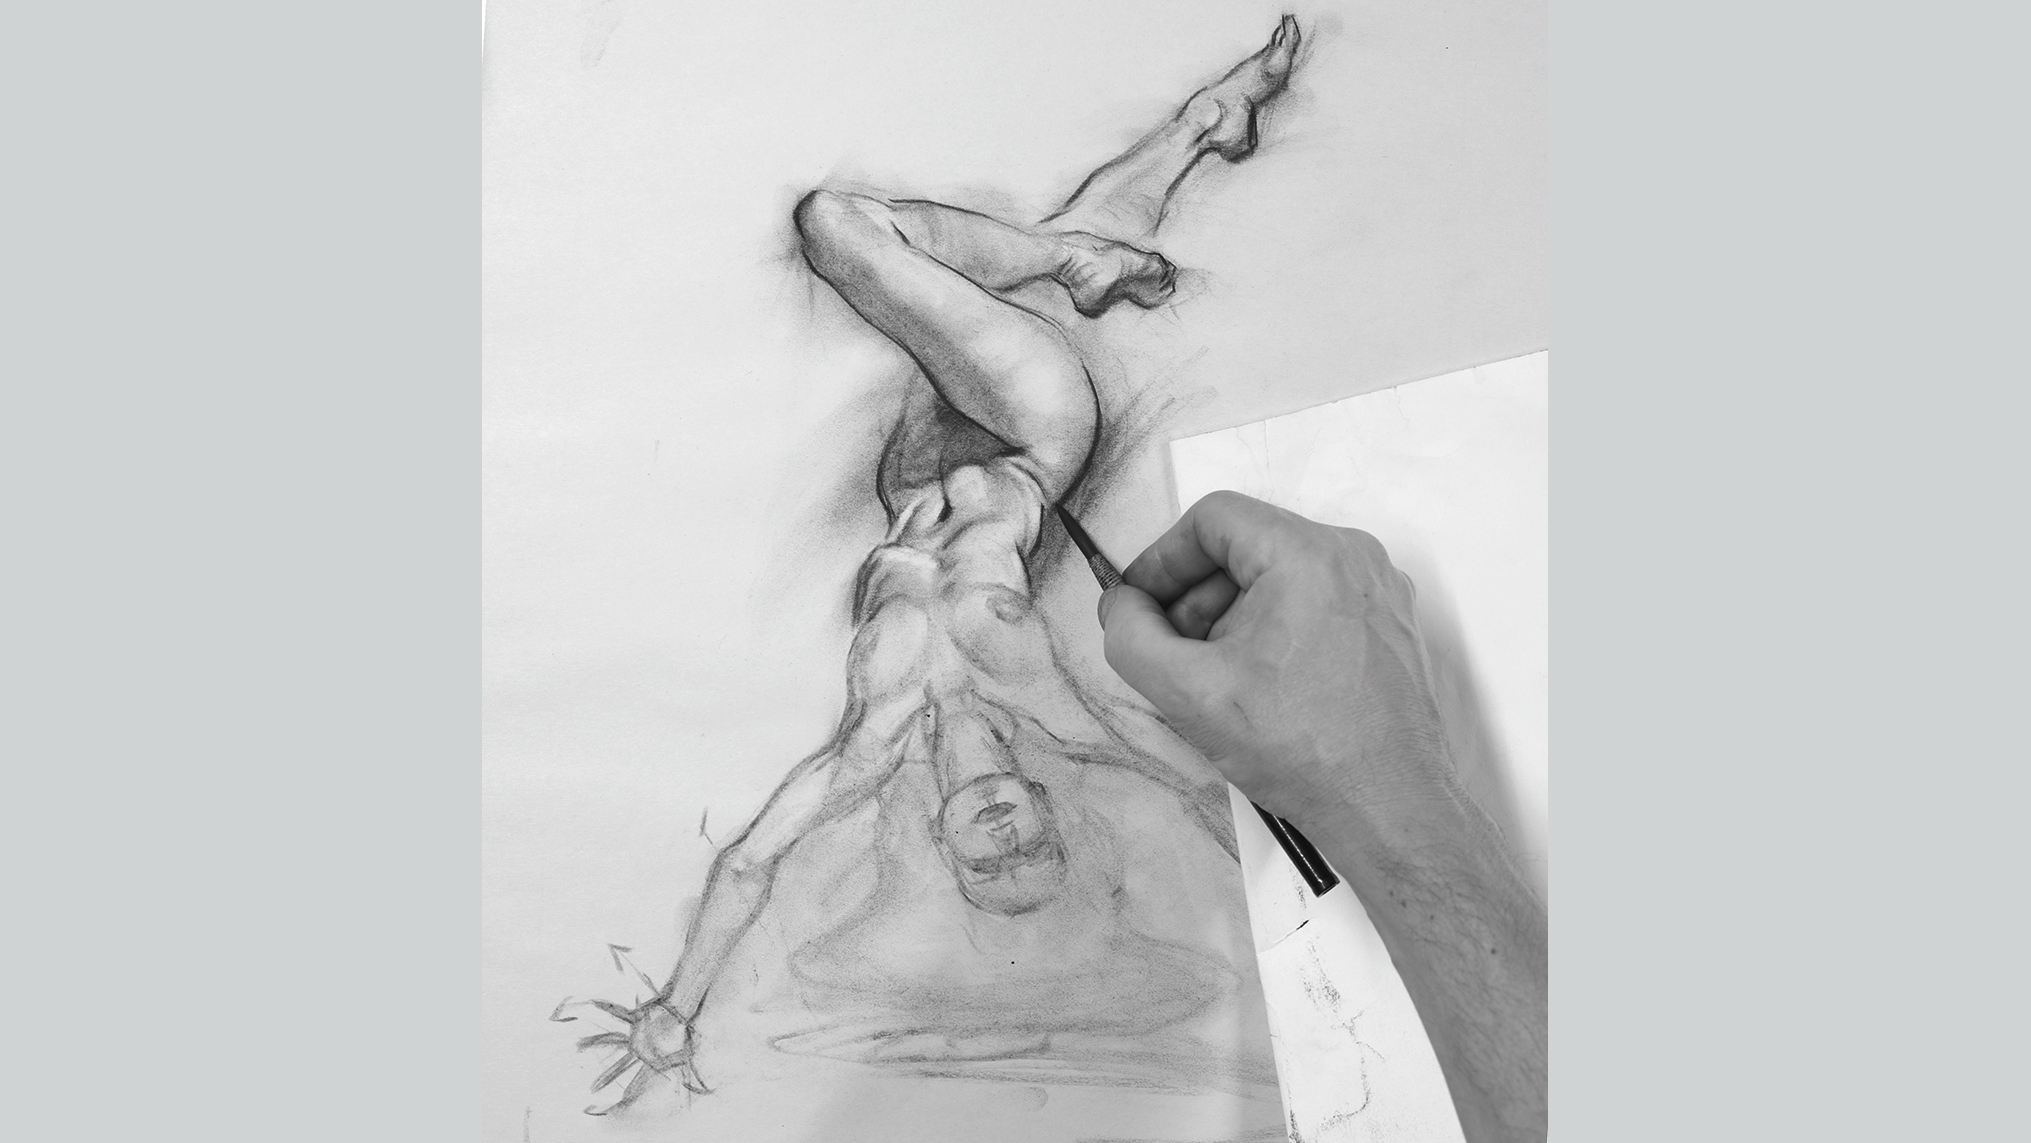 Learn to draw figures: Create movement